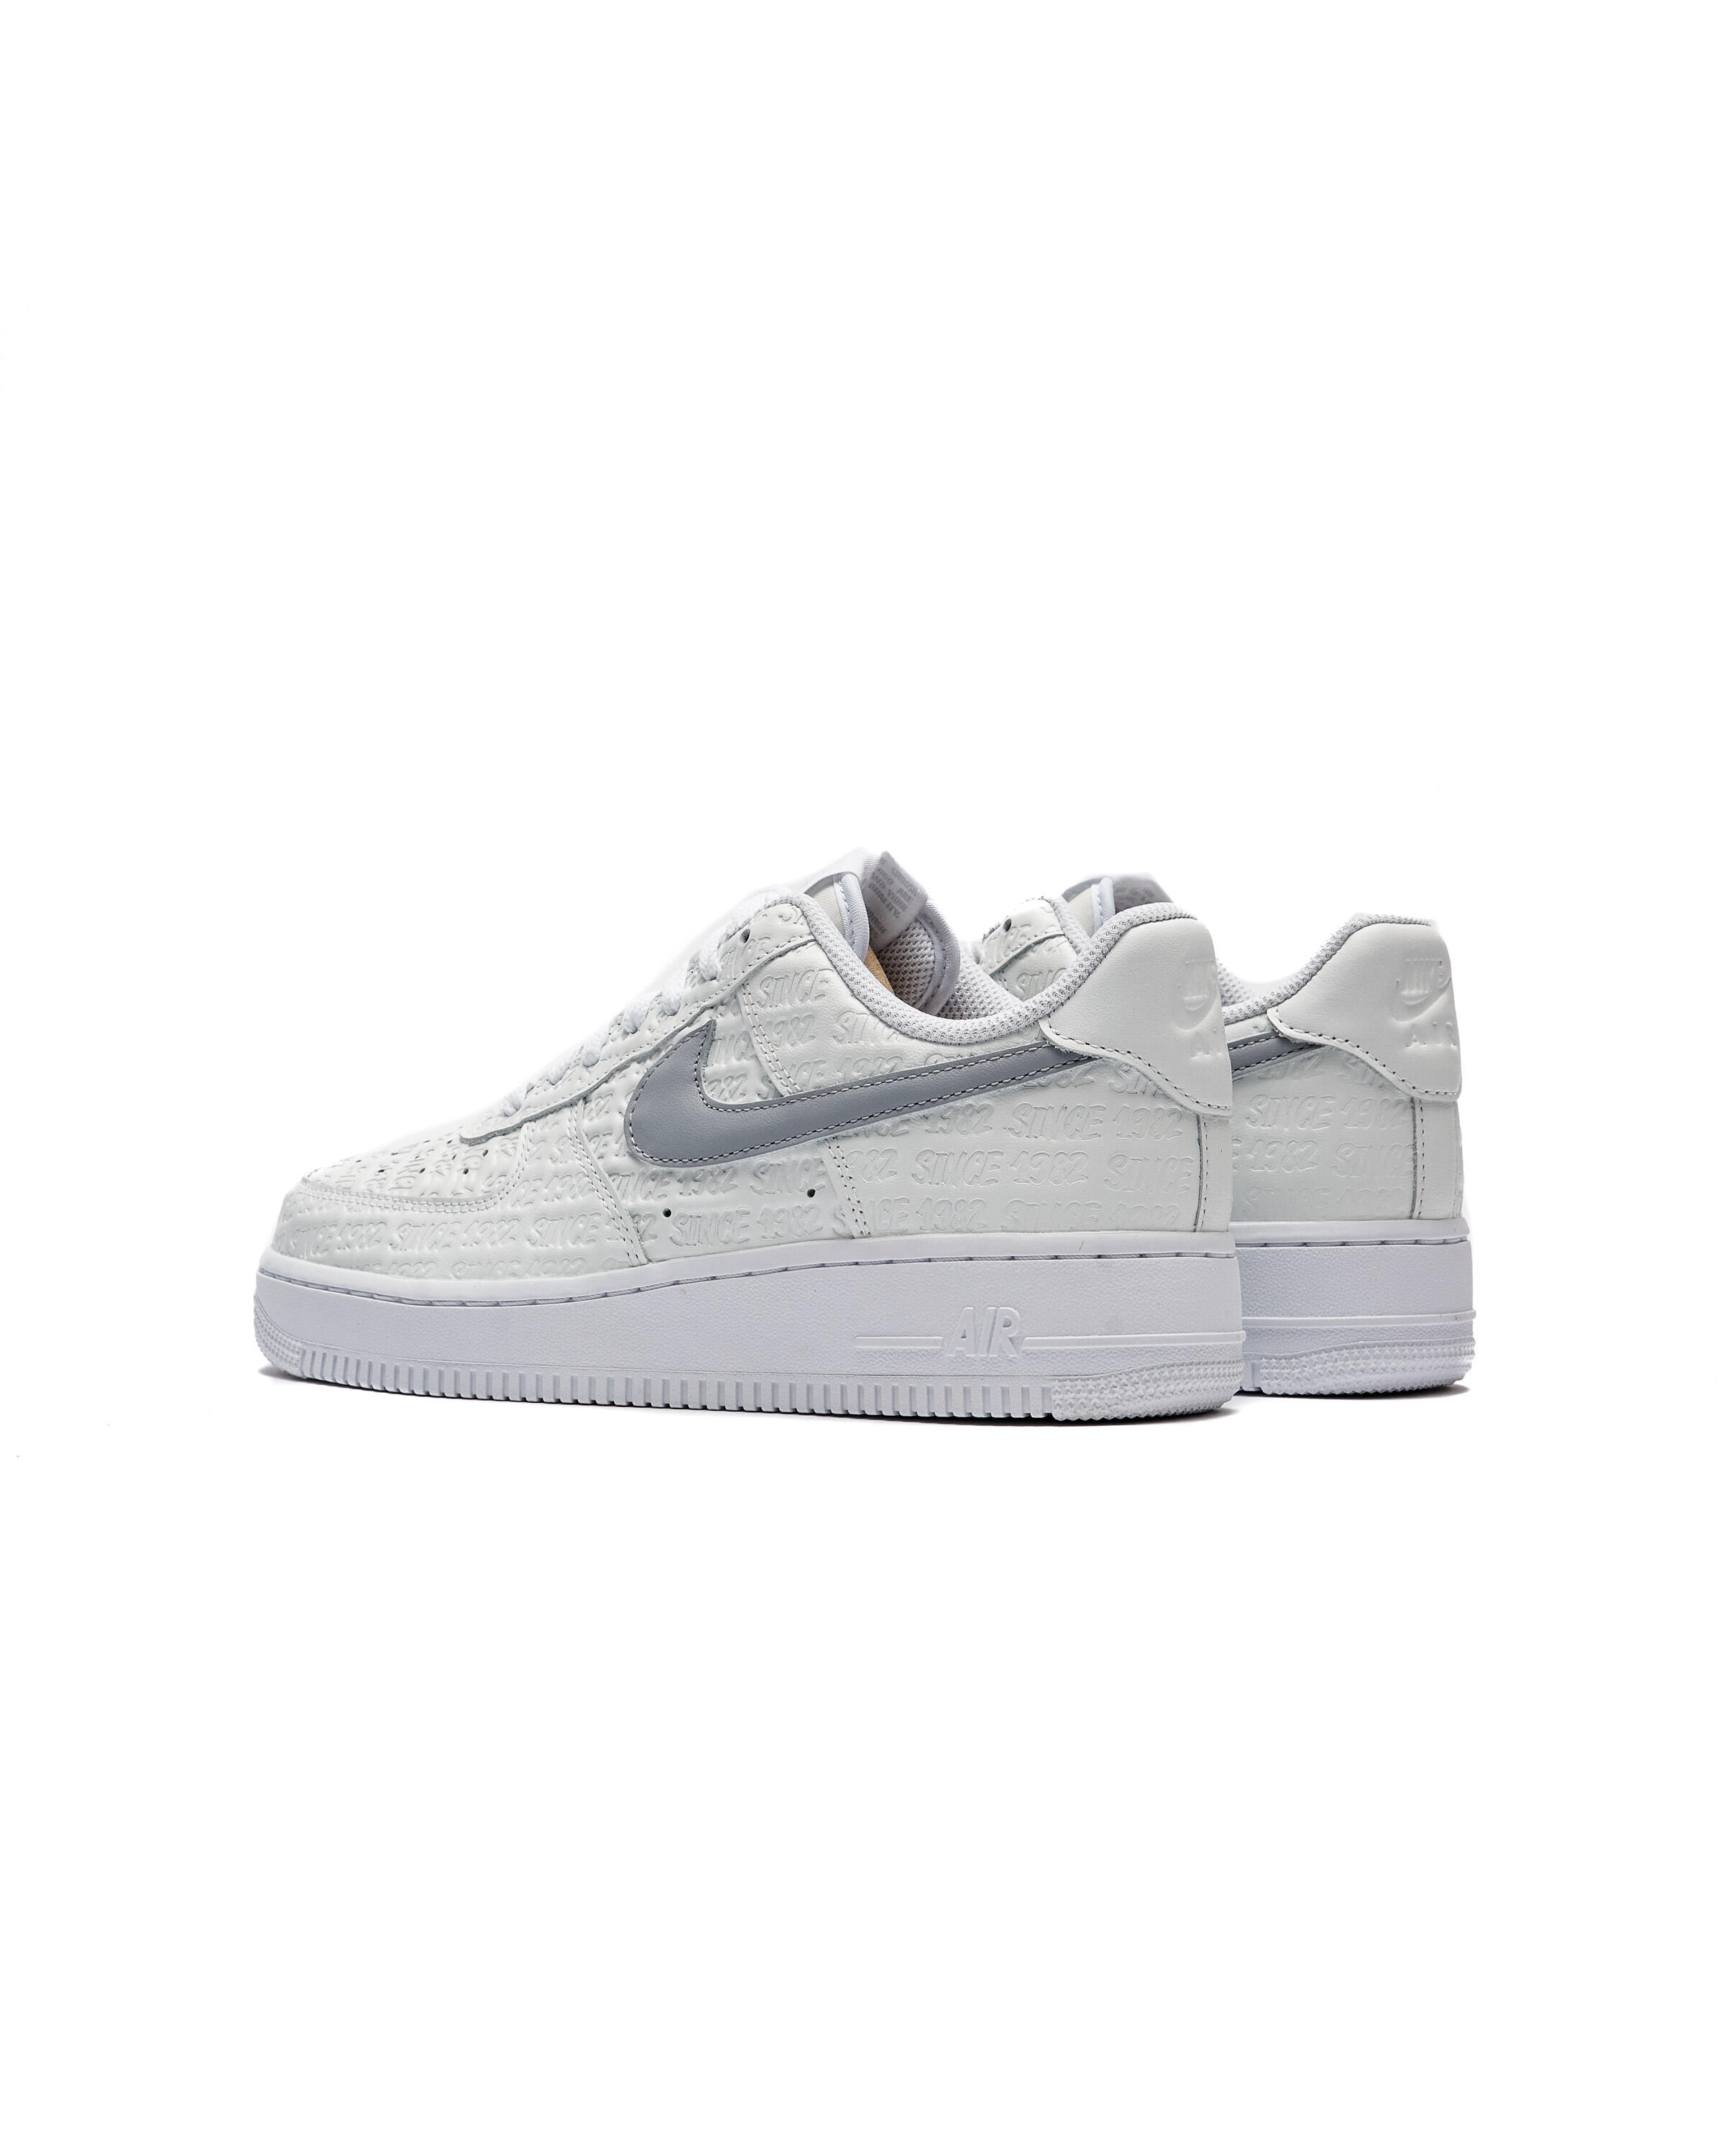 Nike WMNS AIR FORCE 1 '07 LOW